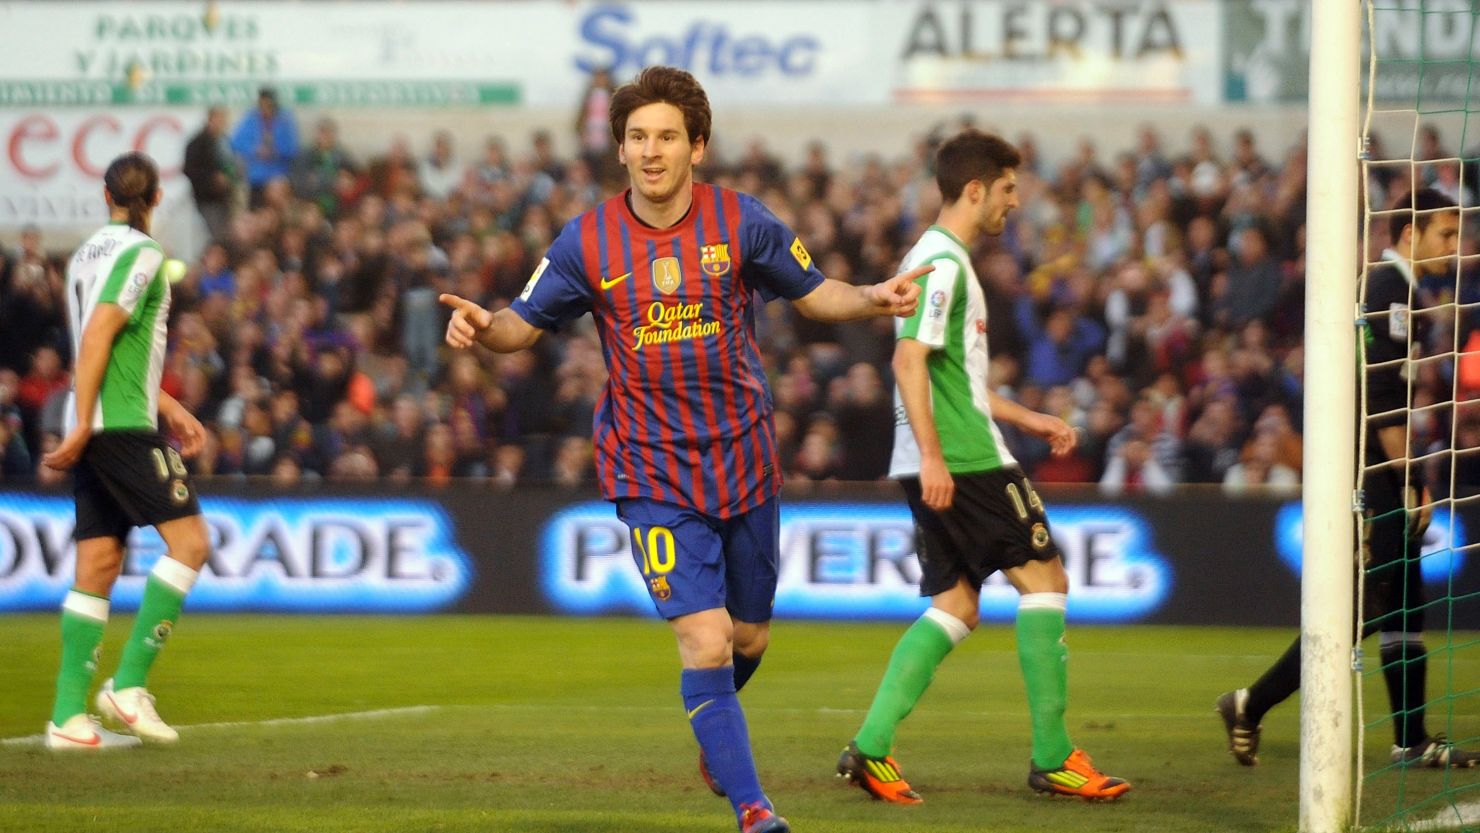 Lionel Messi has now scored seven goals this week, after his double strike saw off Racing Santander.